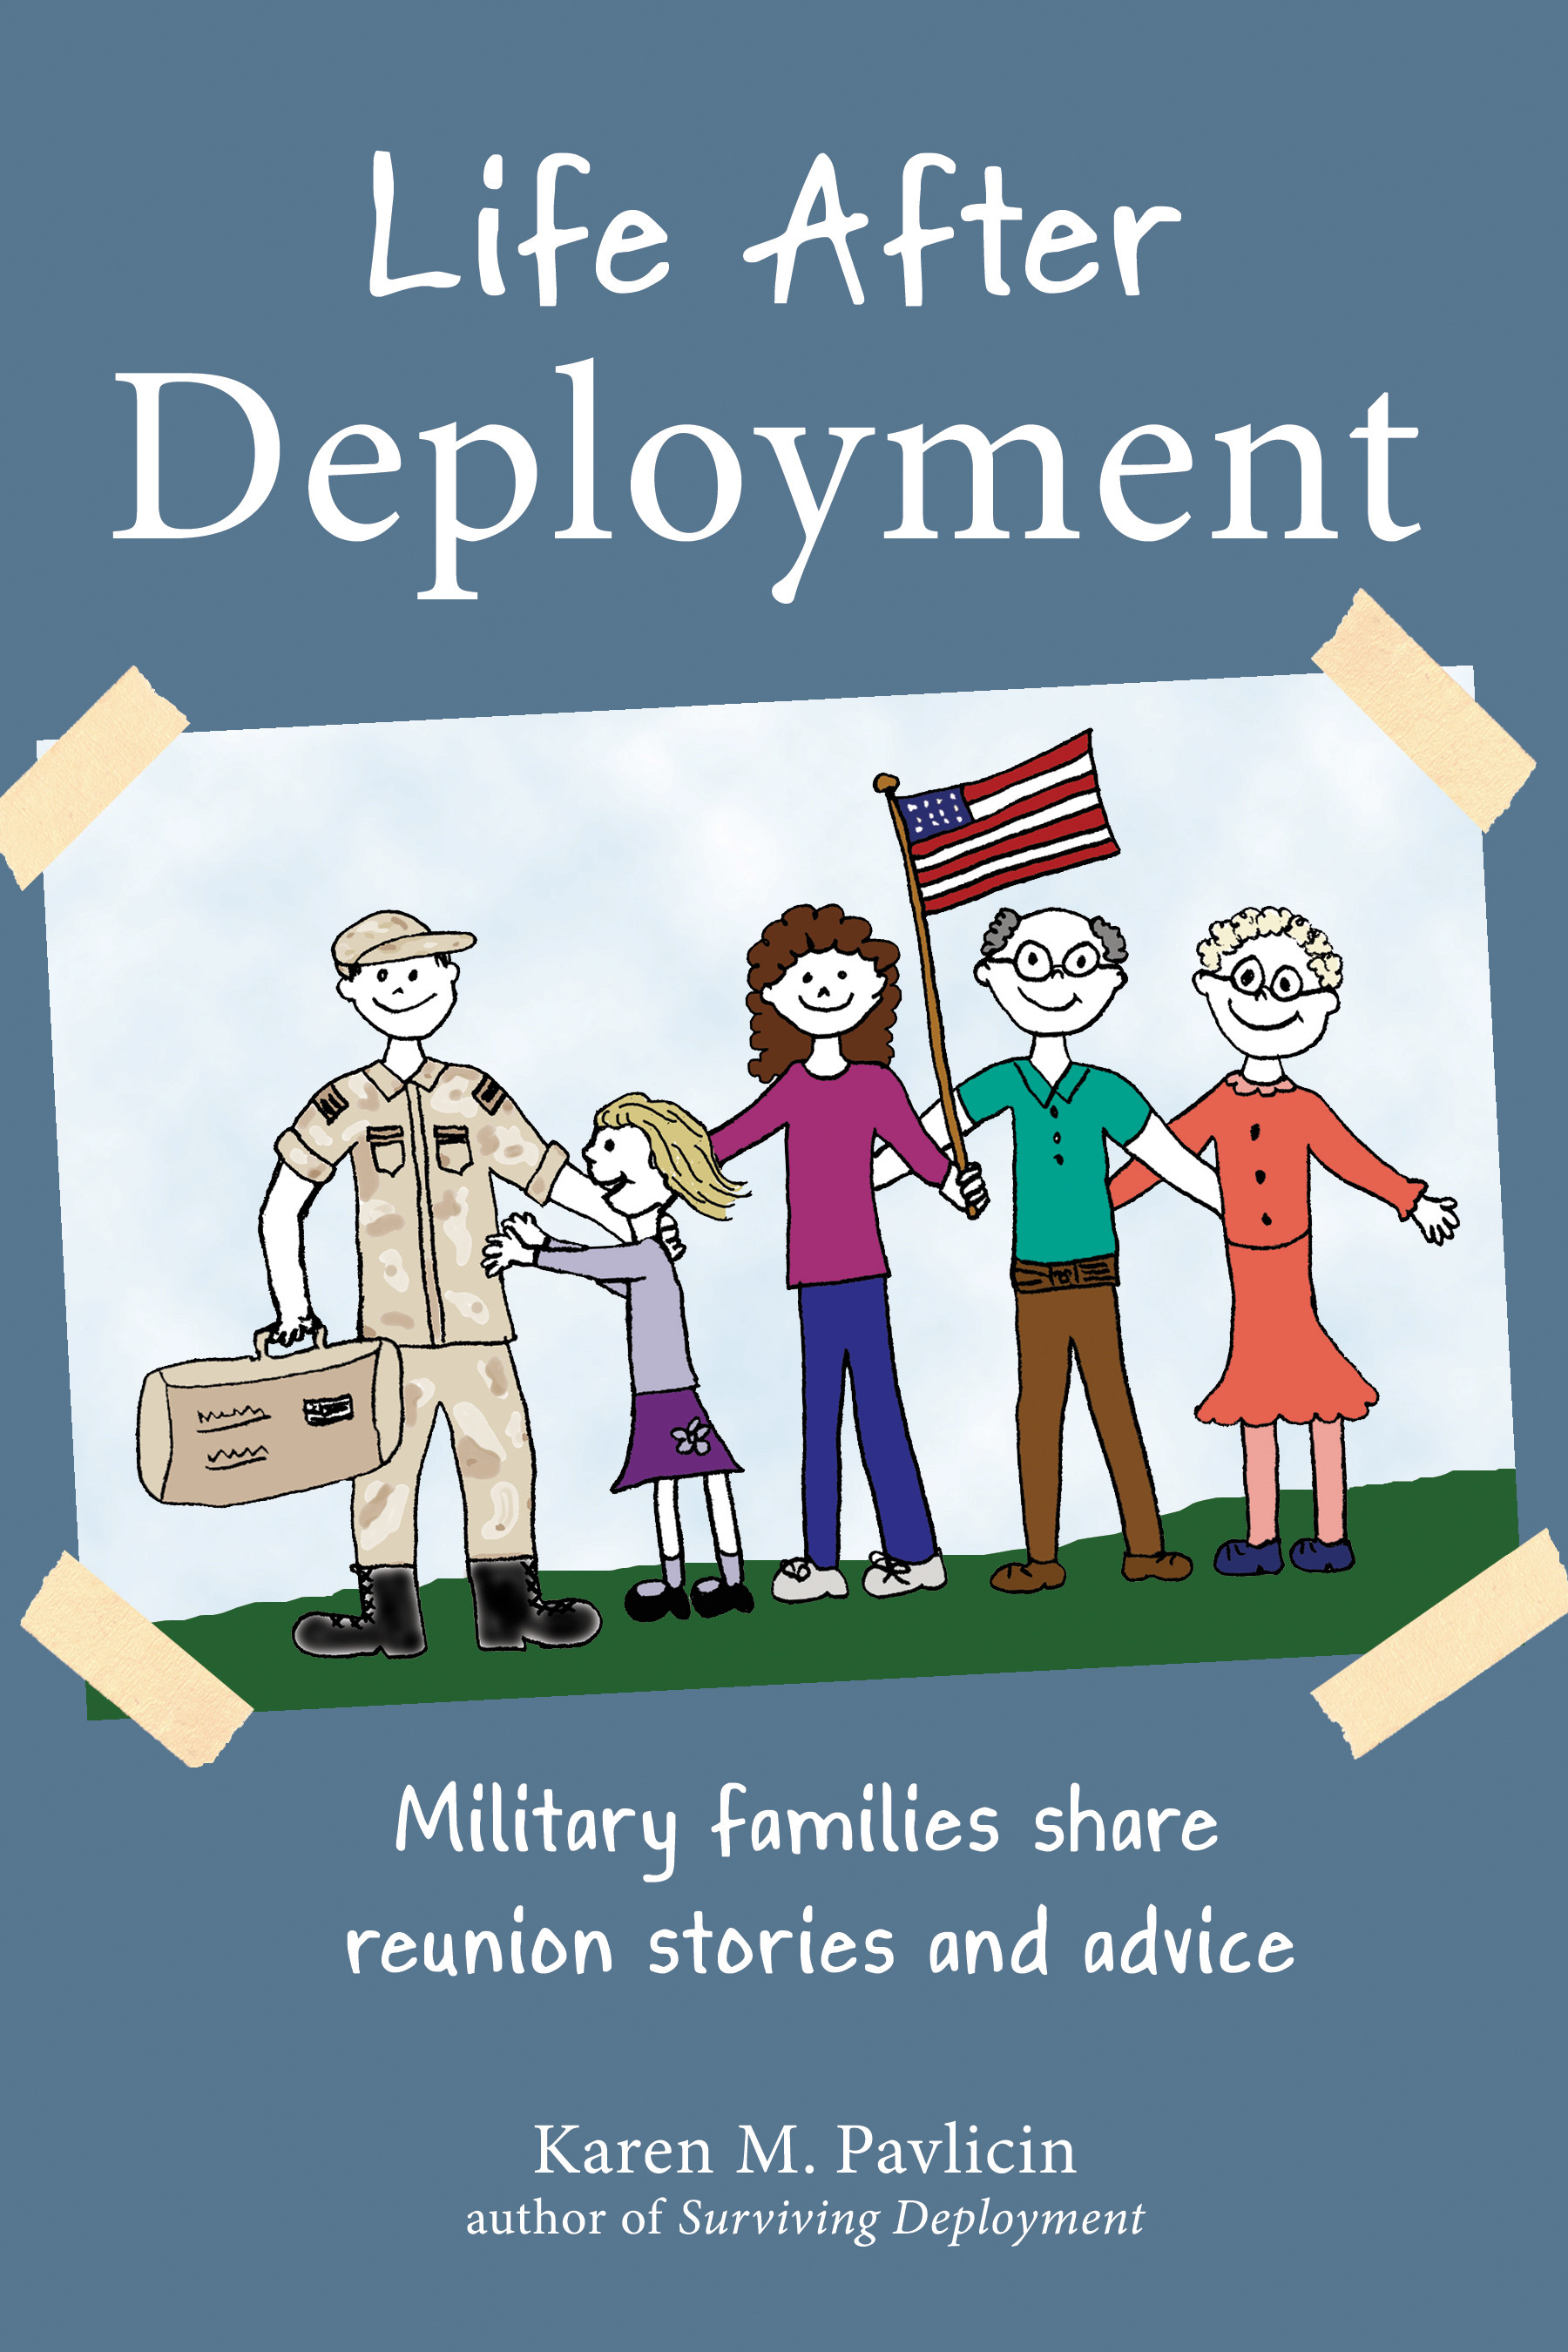 Life After Deployment: Military families share reunion stories and advice by Karen Pavlicin